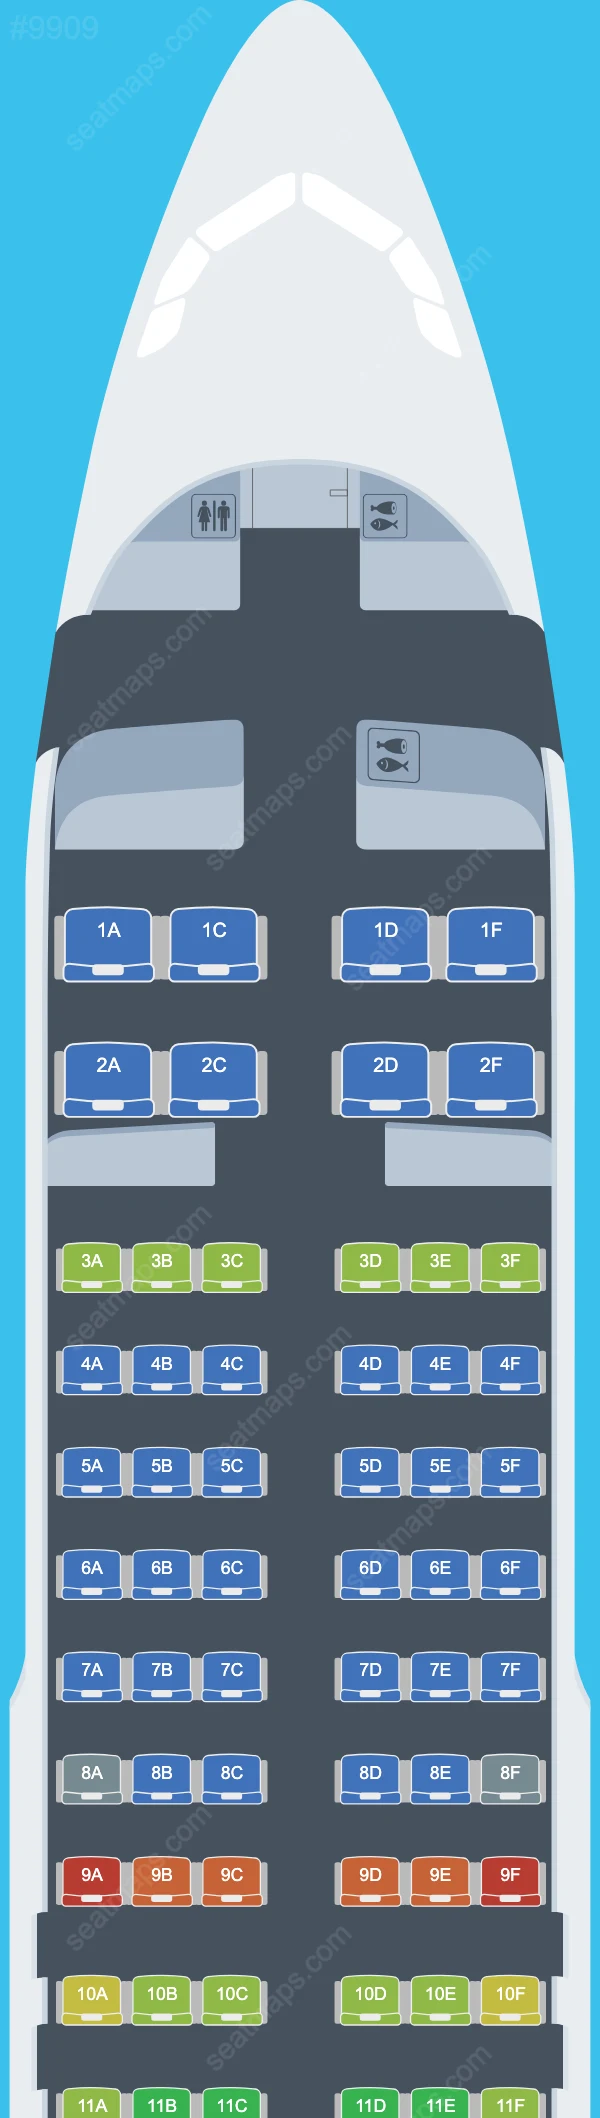 LongJiang Airlines Airbus A320 Seat Maps A320-200 V.2